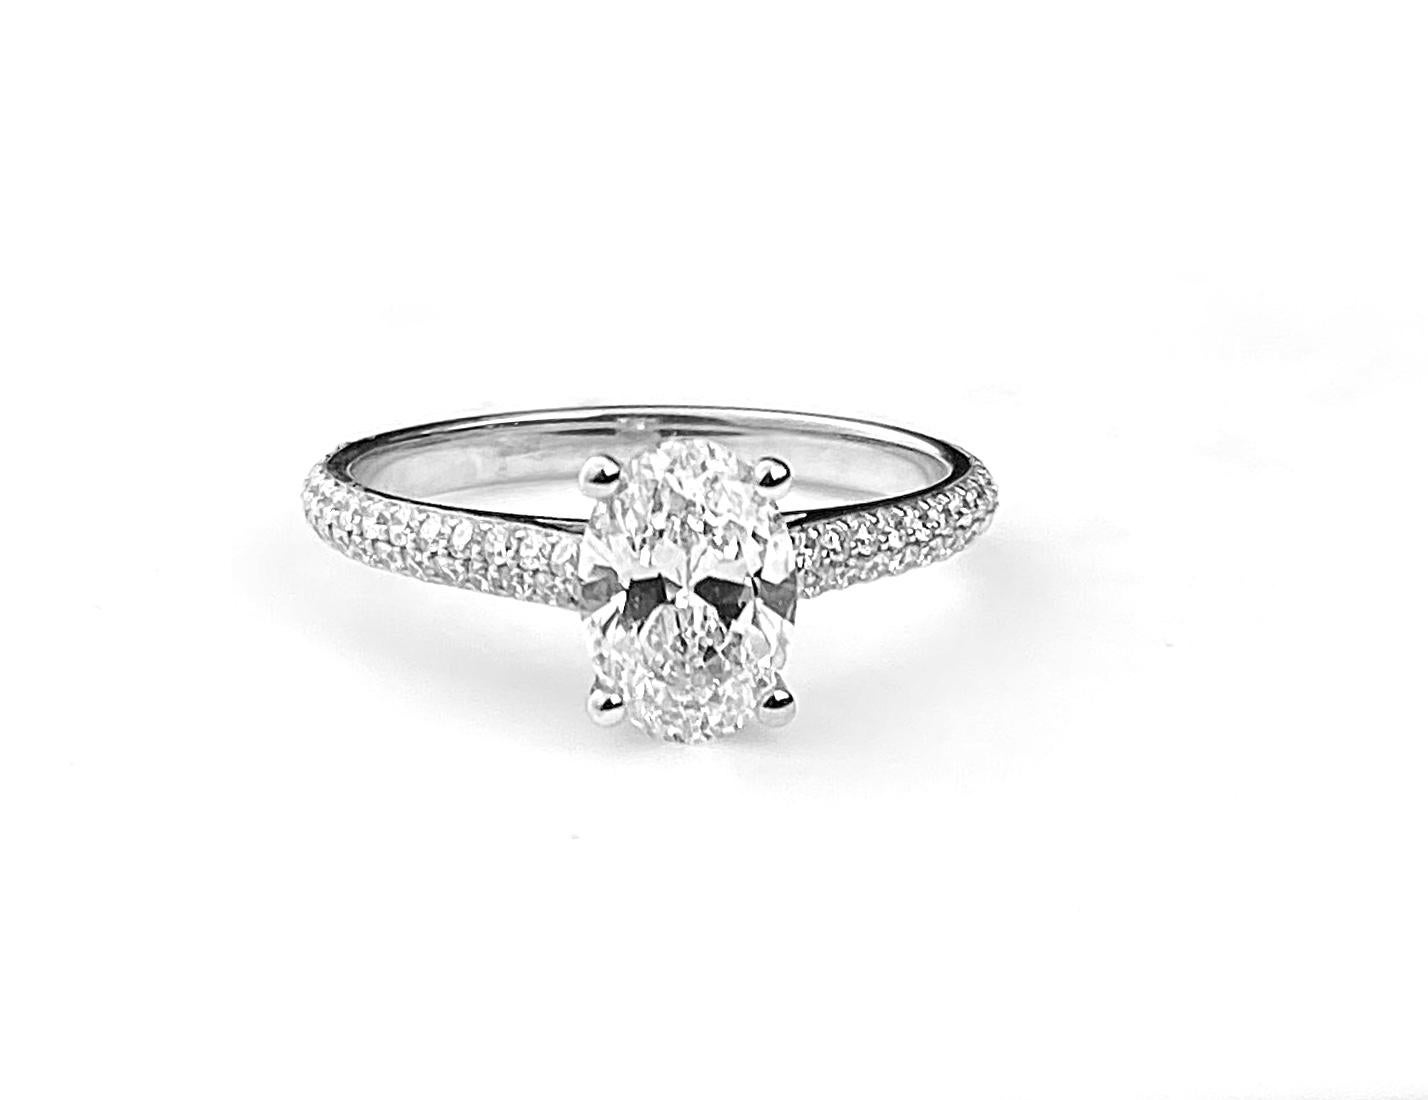 Oval Cut Diamond Solitaire Engagement Ring with Pavé Set Diamond Band For Sale 2